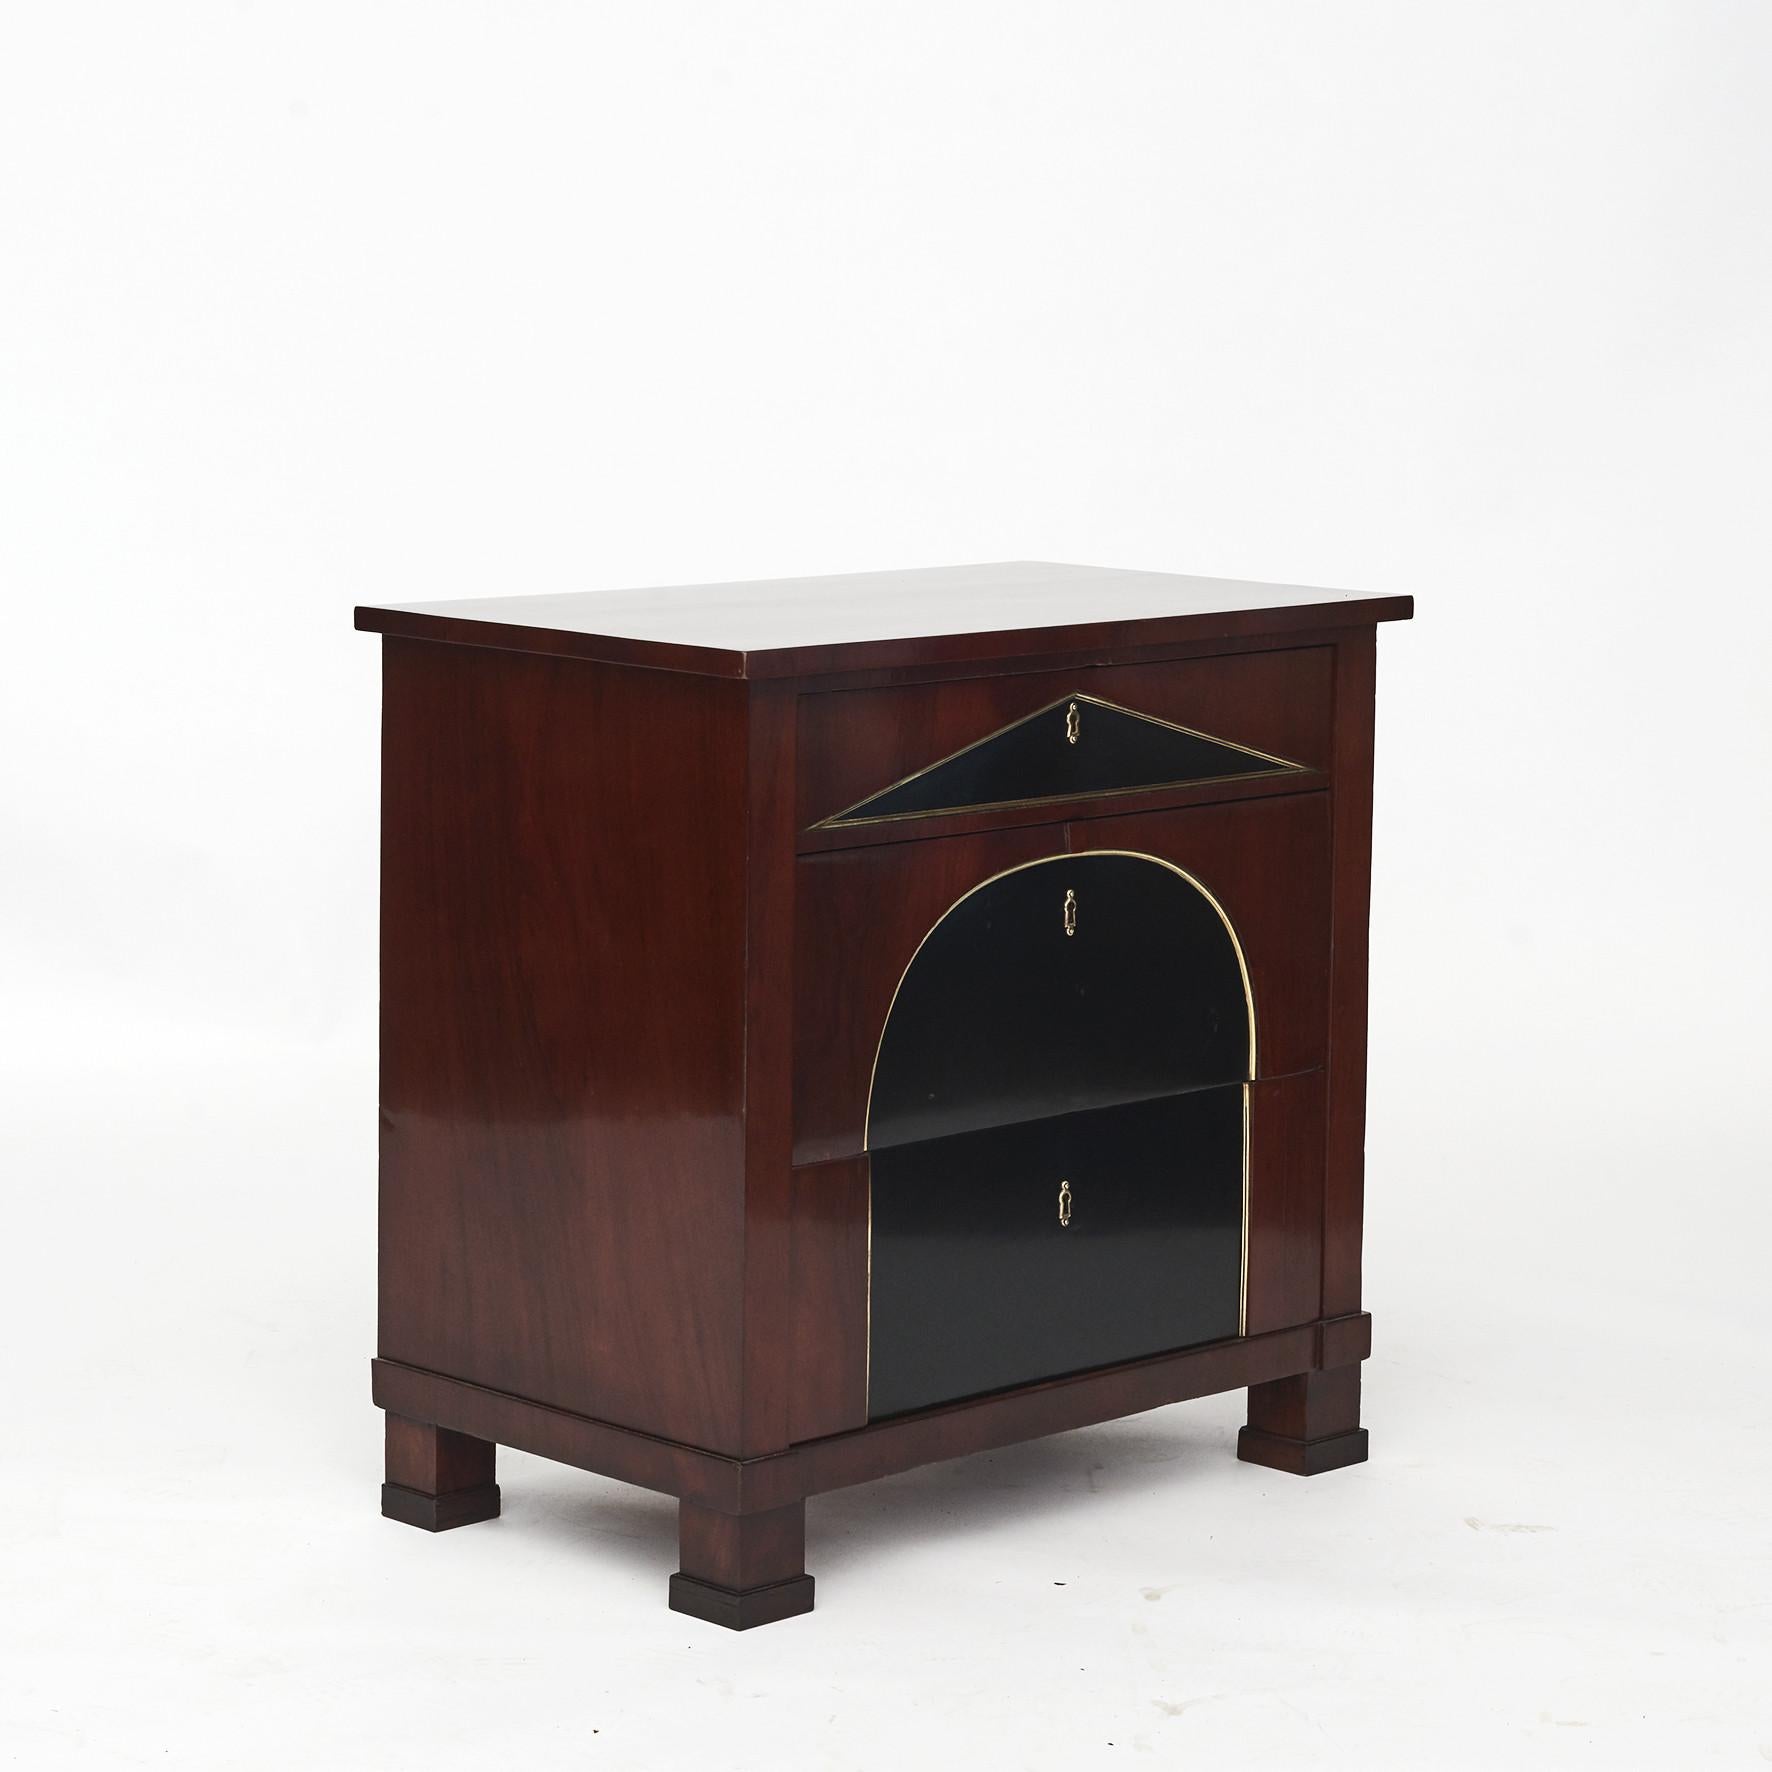 Neo classicist mahogany chest of drawers with 3 drawers.
The top drawer with triangle, ebonized mahogany surrounded by profiled gilt bronze molding.
Two lower drawers with an arched ebonized mahogany surrounded by profiled gilt bronze